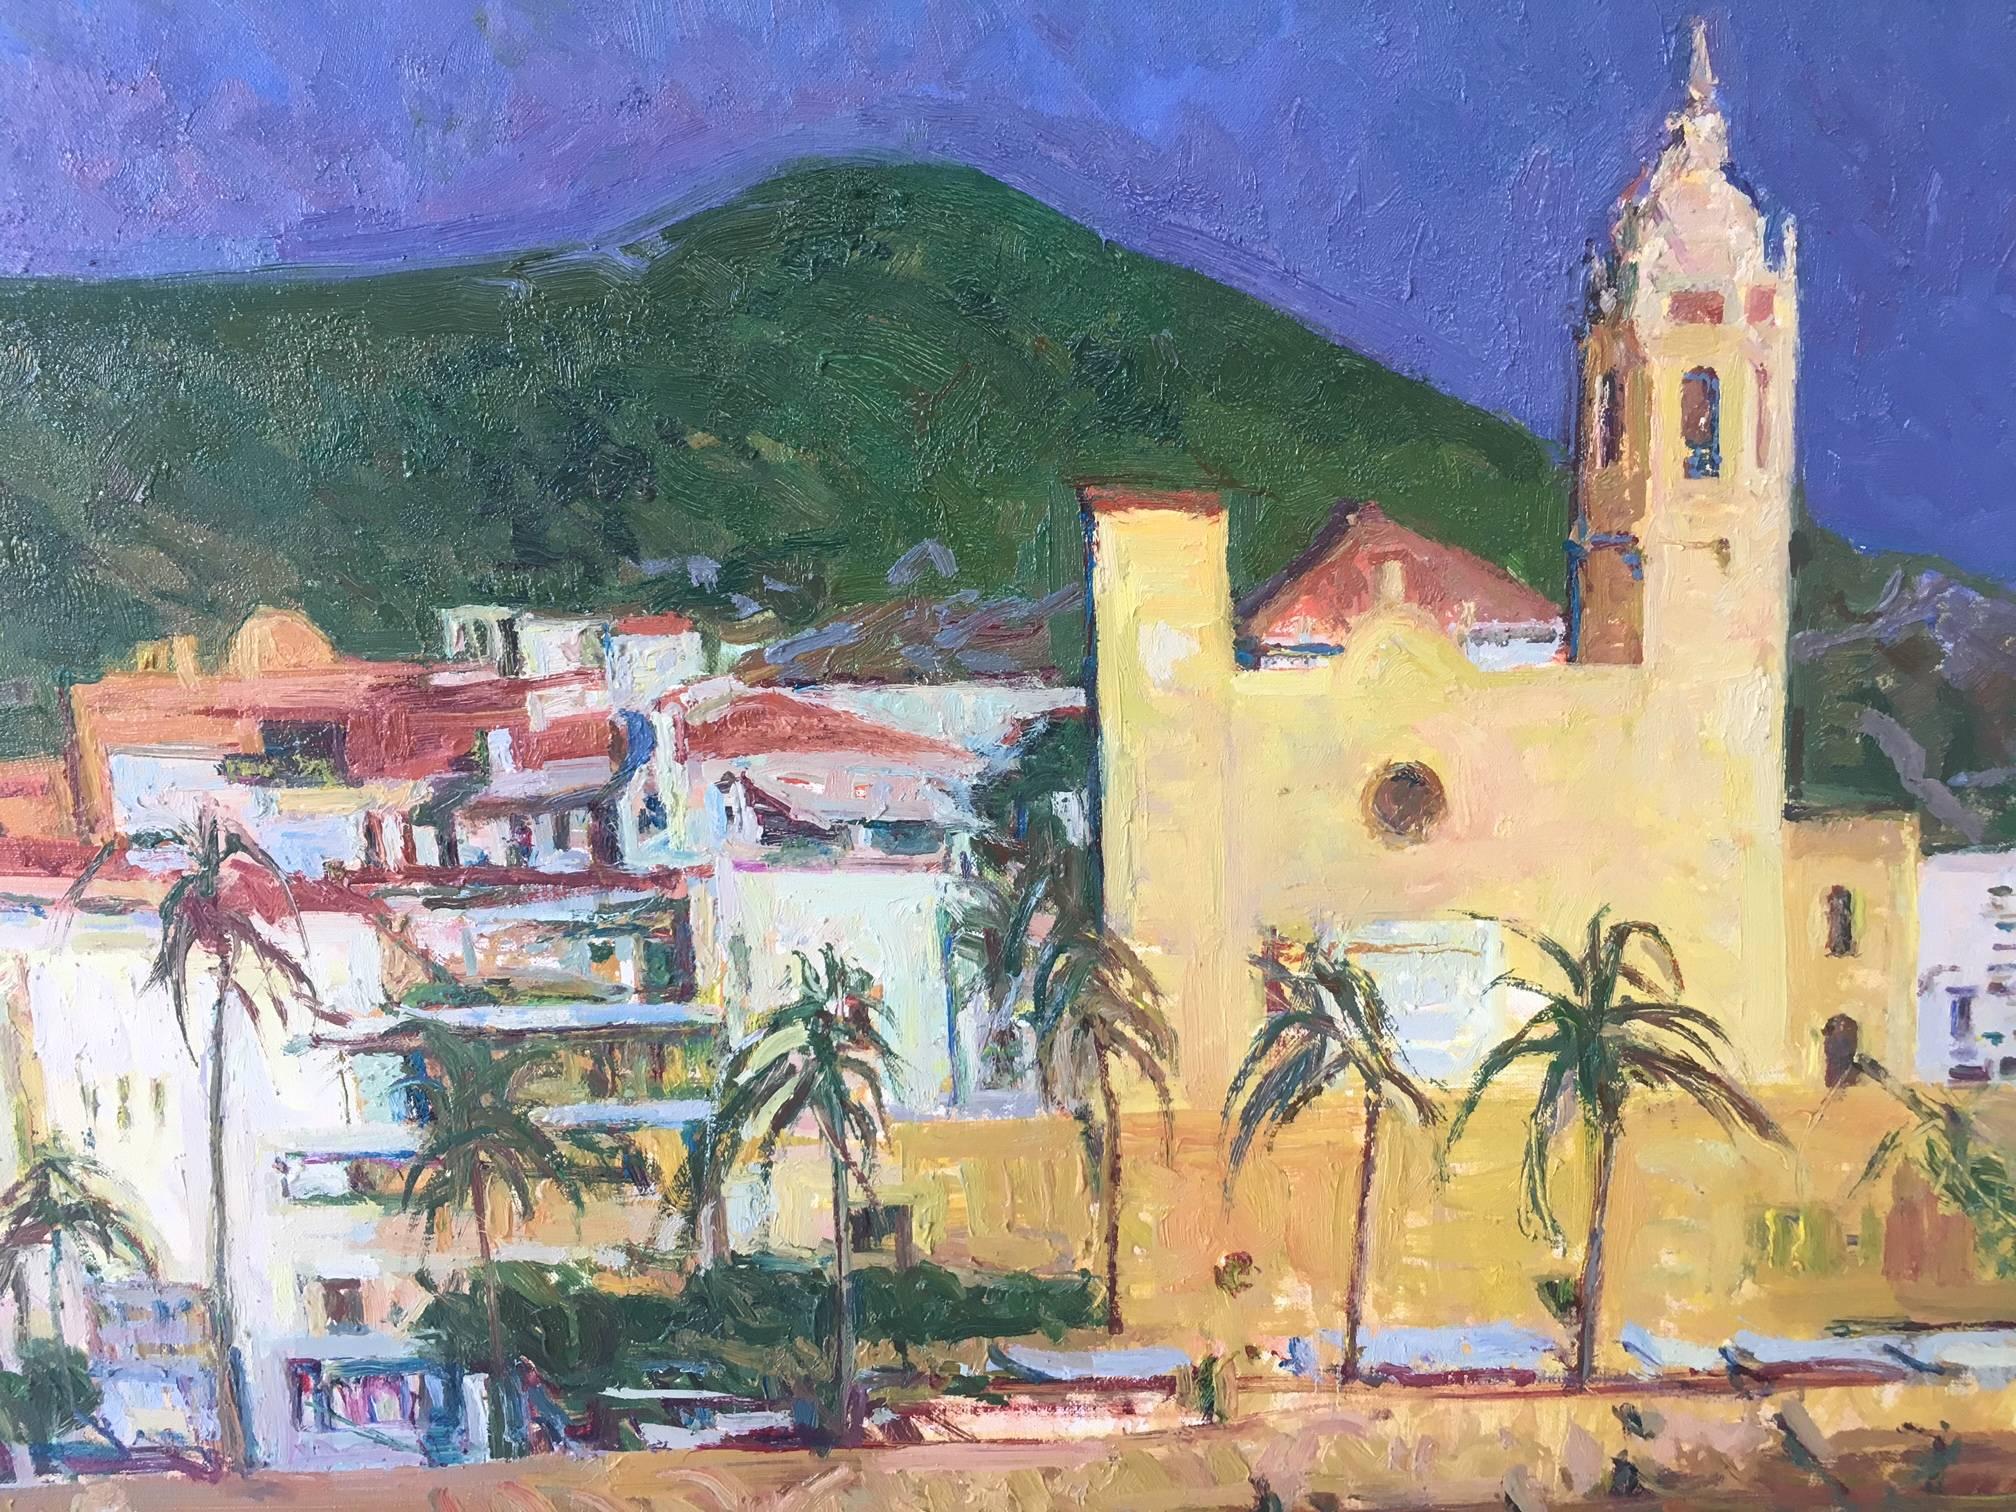 Sitges original impressionist canvas oil painting. 
Original work by the Spanish artist Joan Sola.
oil on canvas
Signed by the artist


SOLÀ PUIG, Joan (Barcelona 1950 )
Joan SOLÁ paints in a natural way, which reflects the Old Masters, soaking up